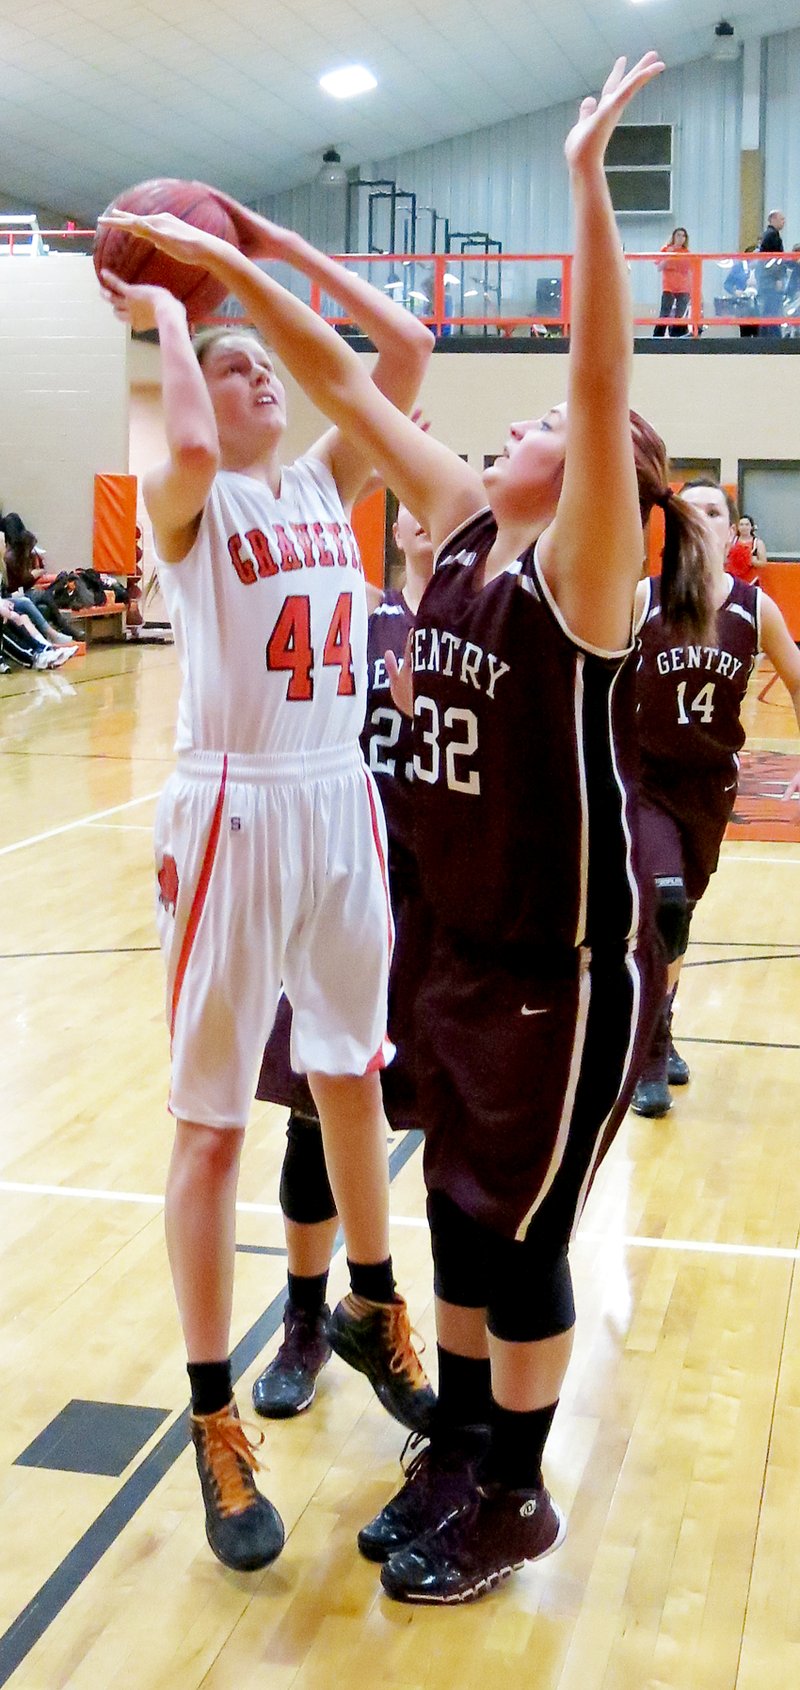 File Photo by Randy Moll Sydney Hicks, Gravette sophomore, attempts a shot while defended by Gentry junior, Meagan Eli, during conference play between the two teams in Gravette.